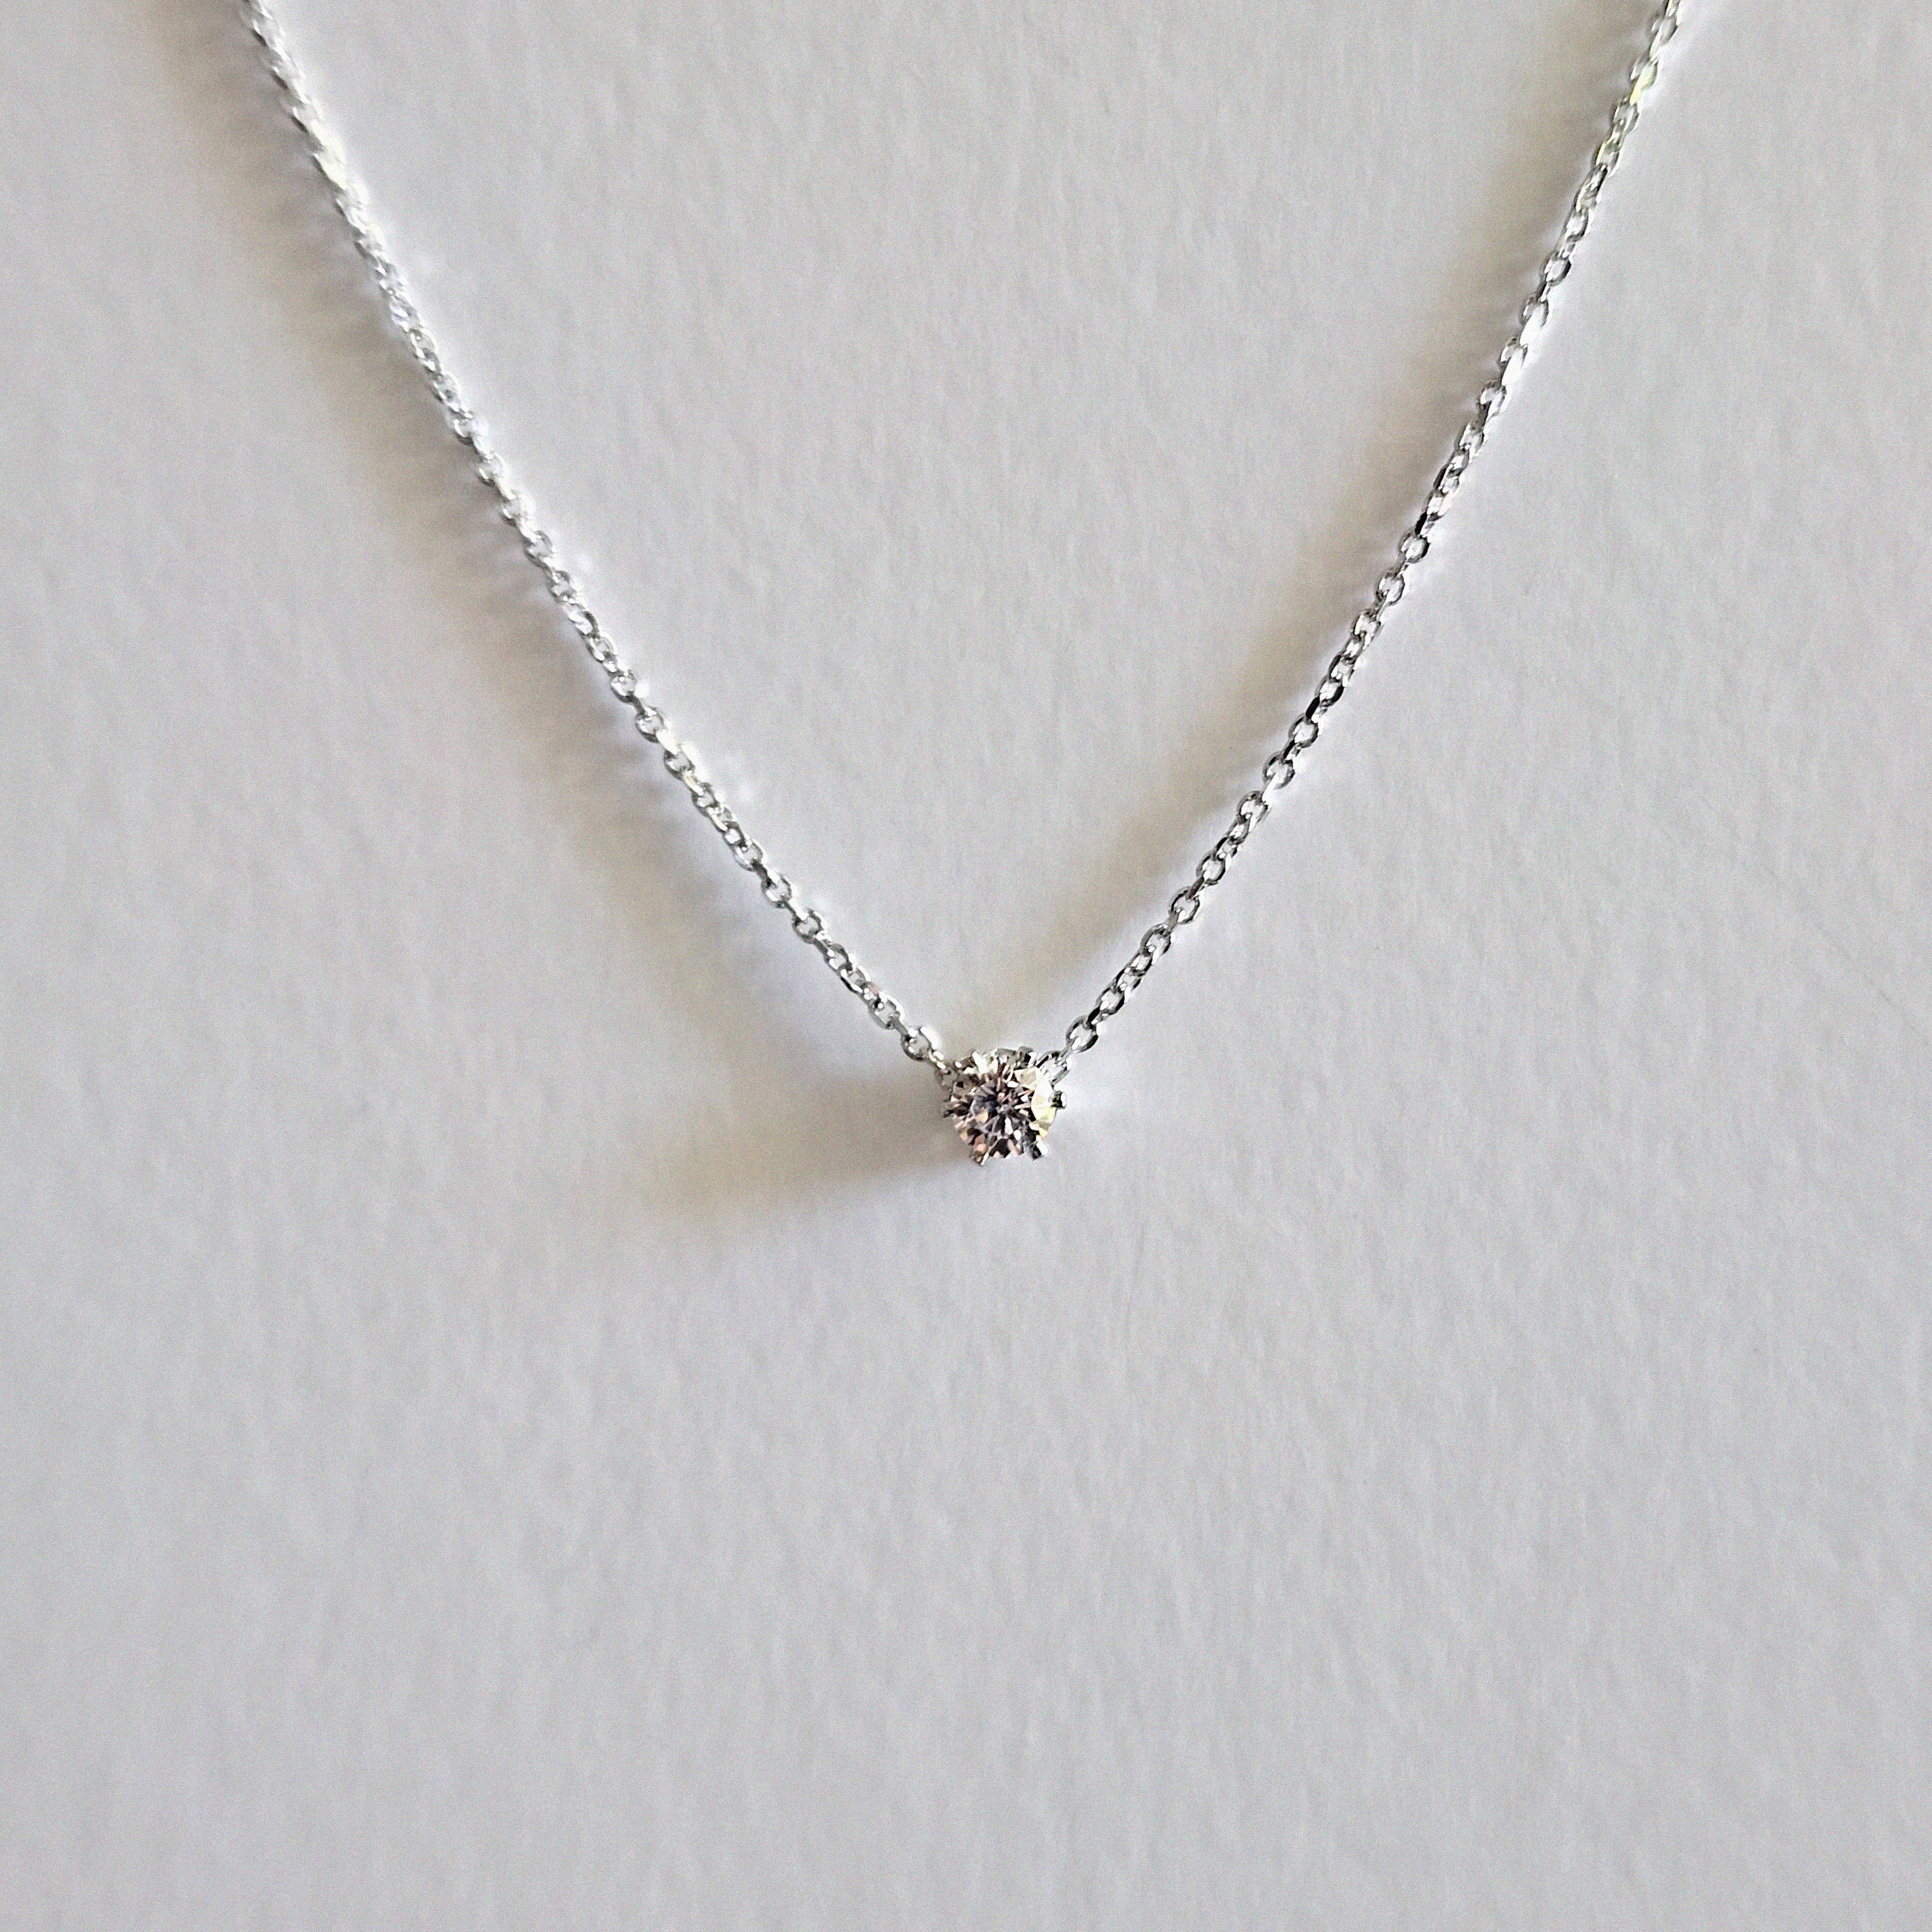 Petite Clear Crystal Necklace 3mm